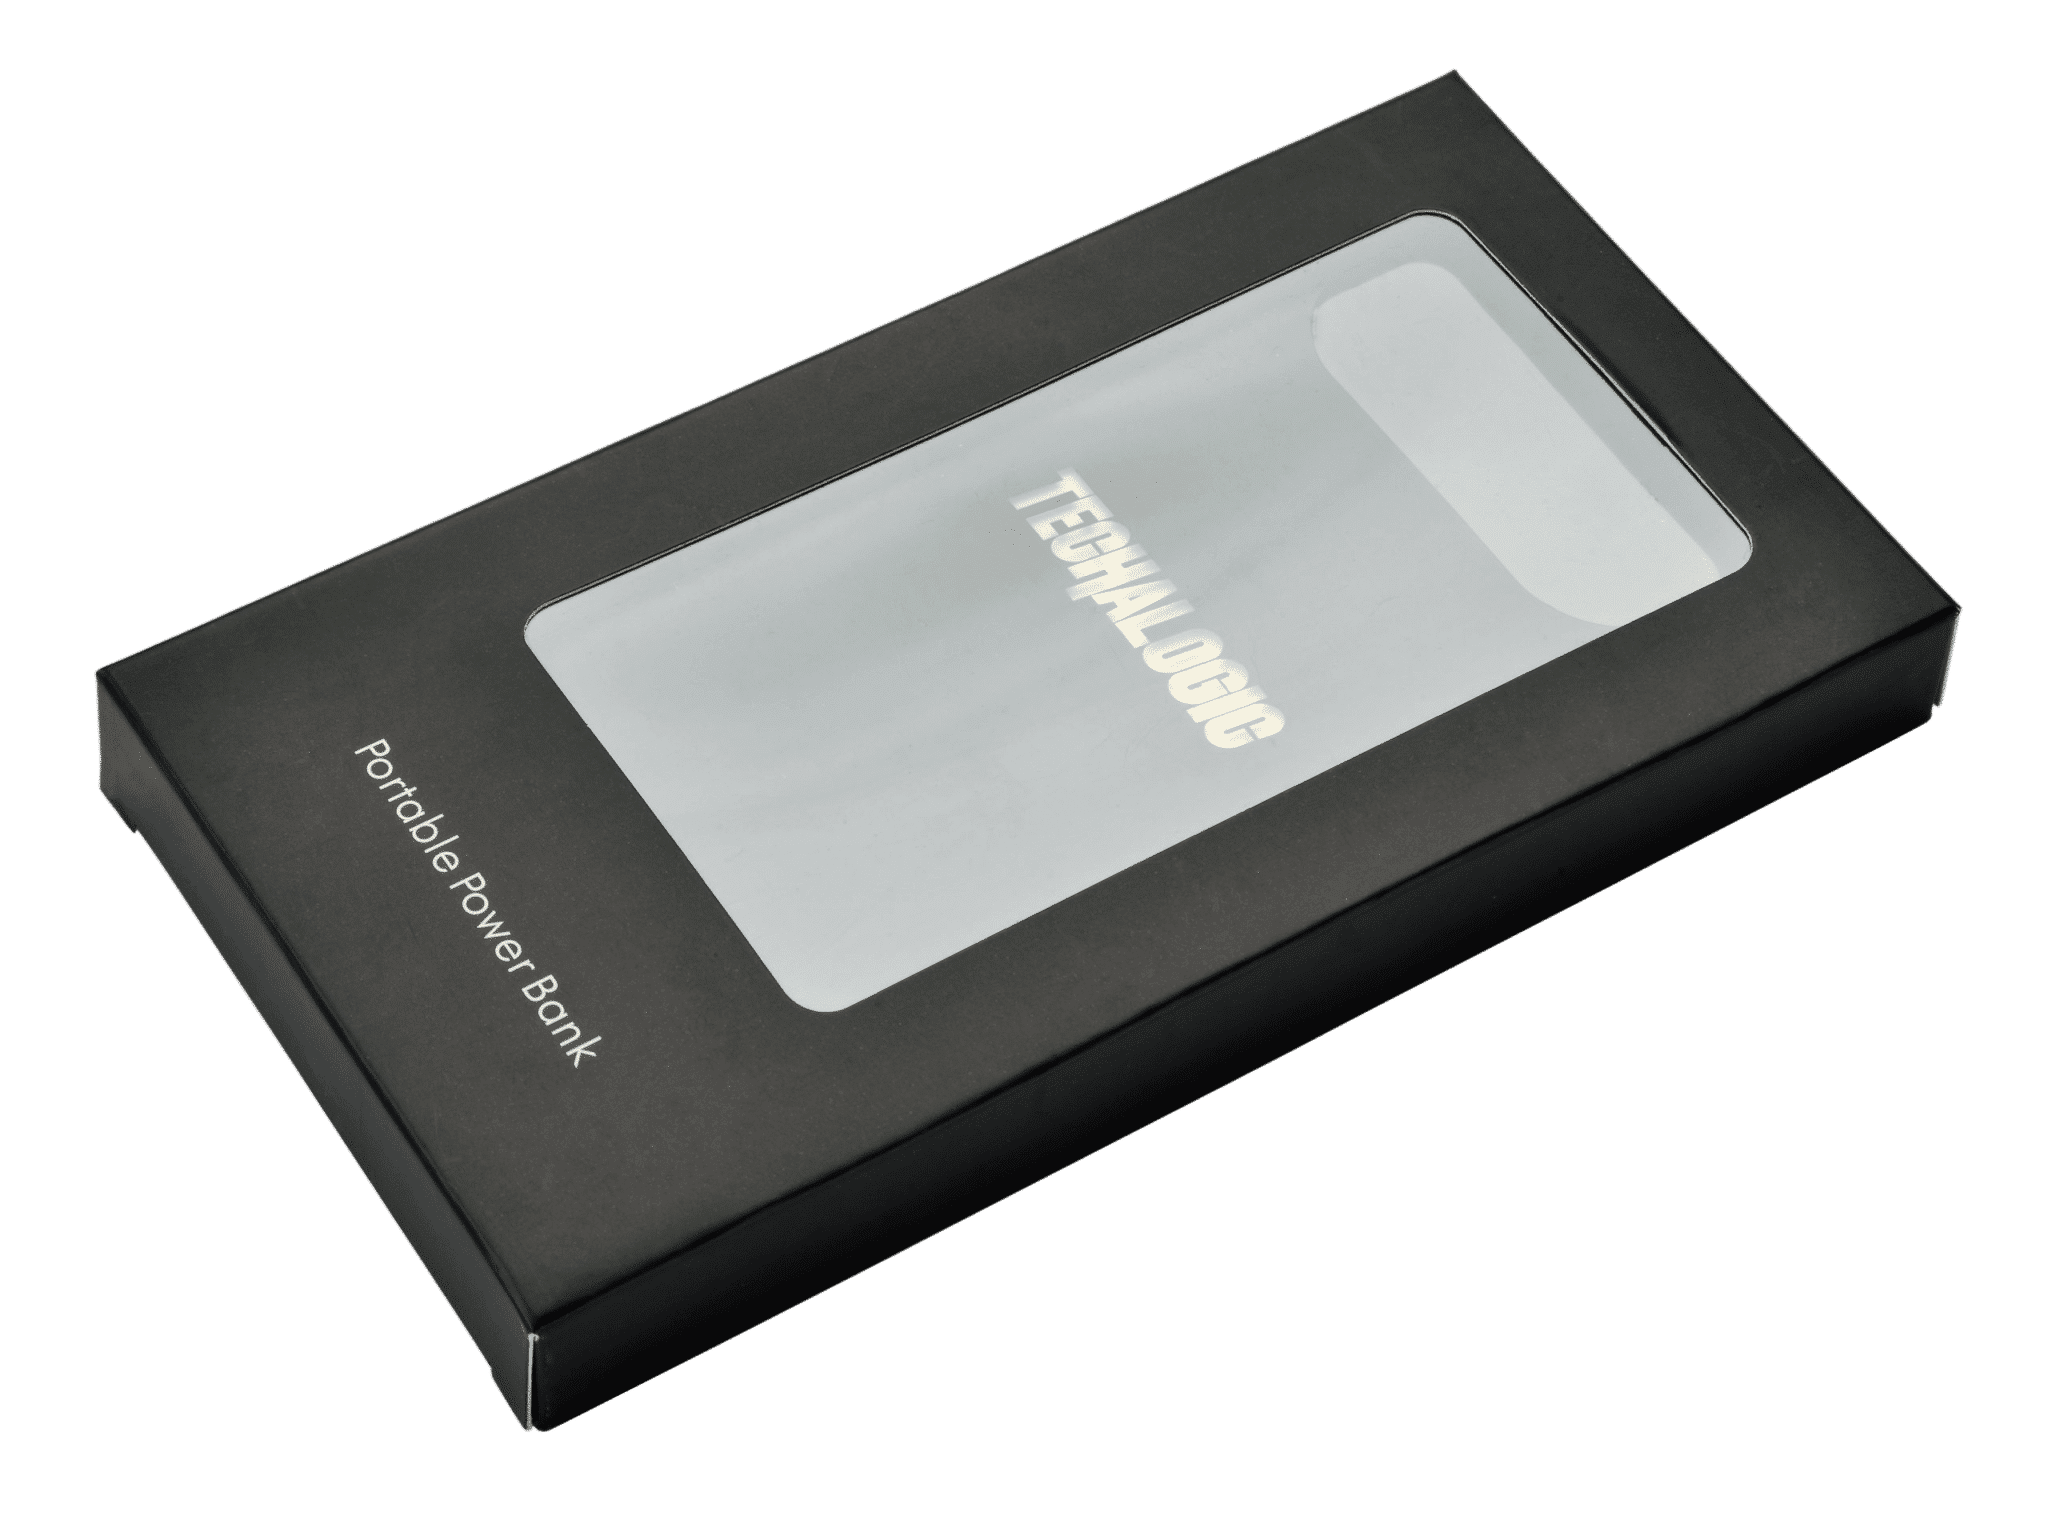 Magpowerx Wireless Charger Power Bank: Slimmest, lightest and